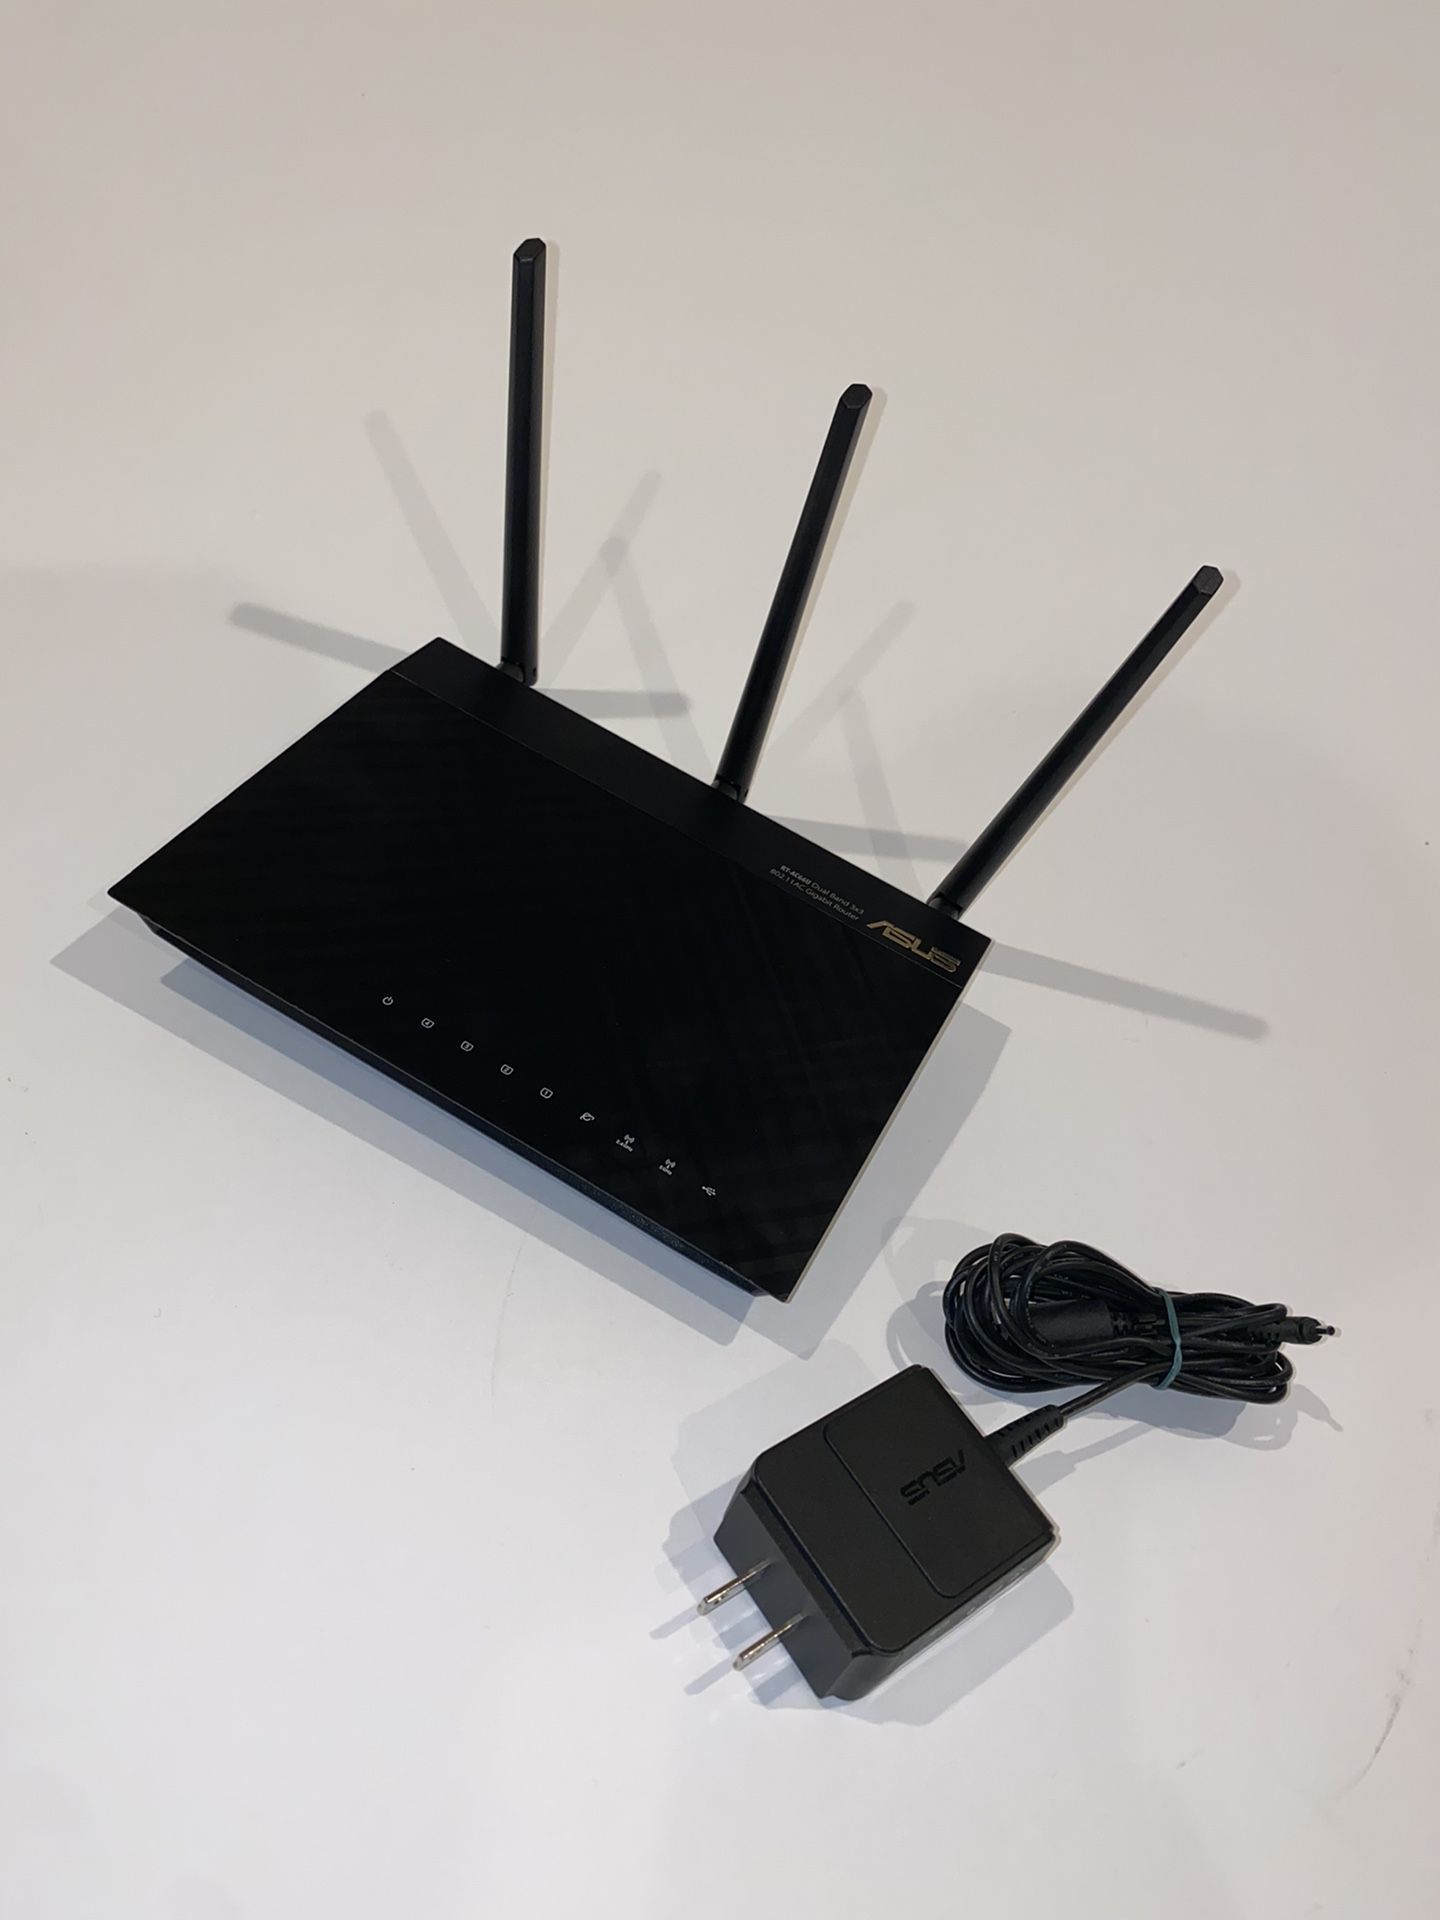 asus WiFi router